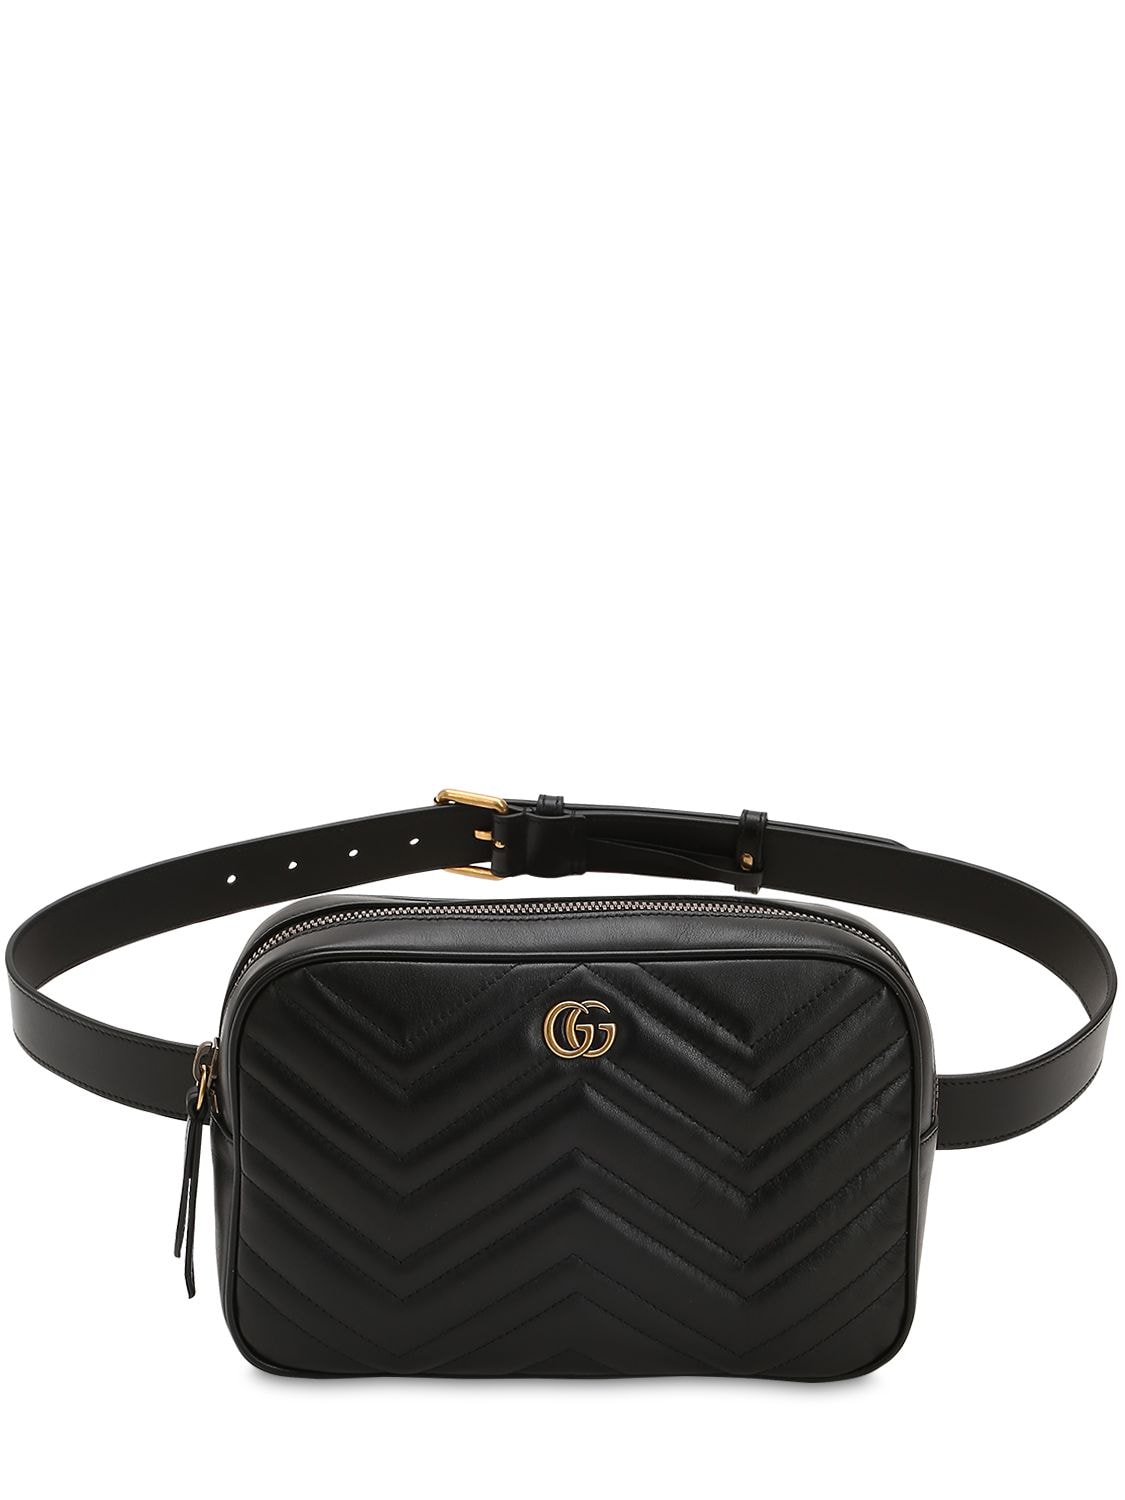 GUCCI GG MARMONT 2.0 QUILTED LEATHER BELT PACK,68IH0L031-MTAwMA2